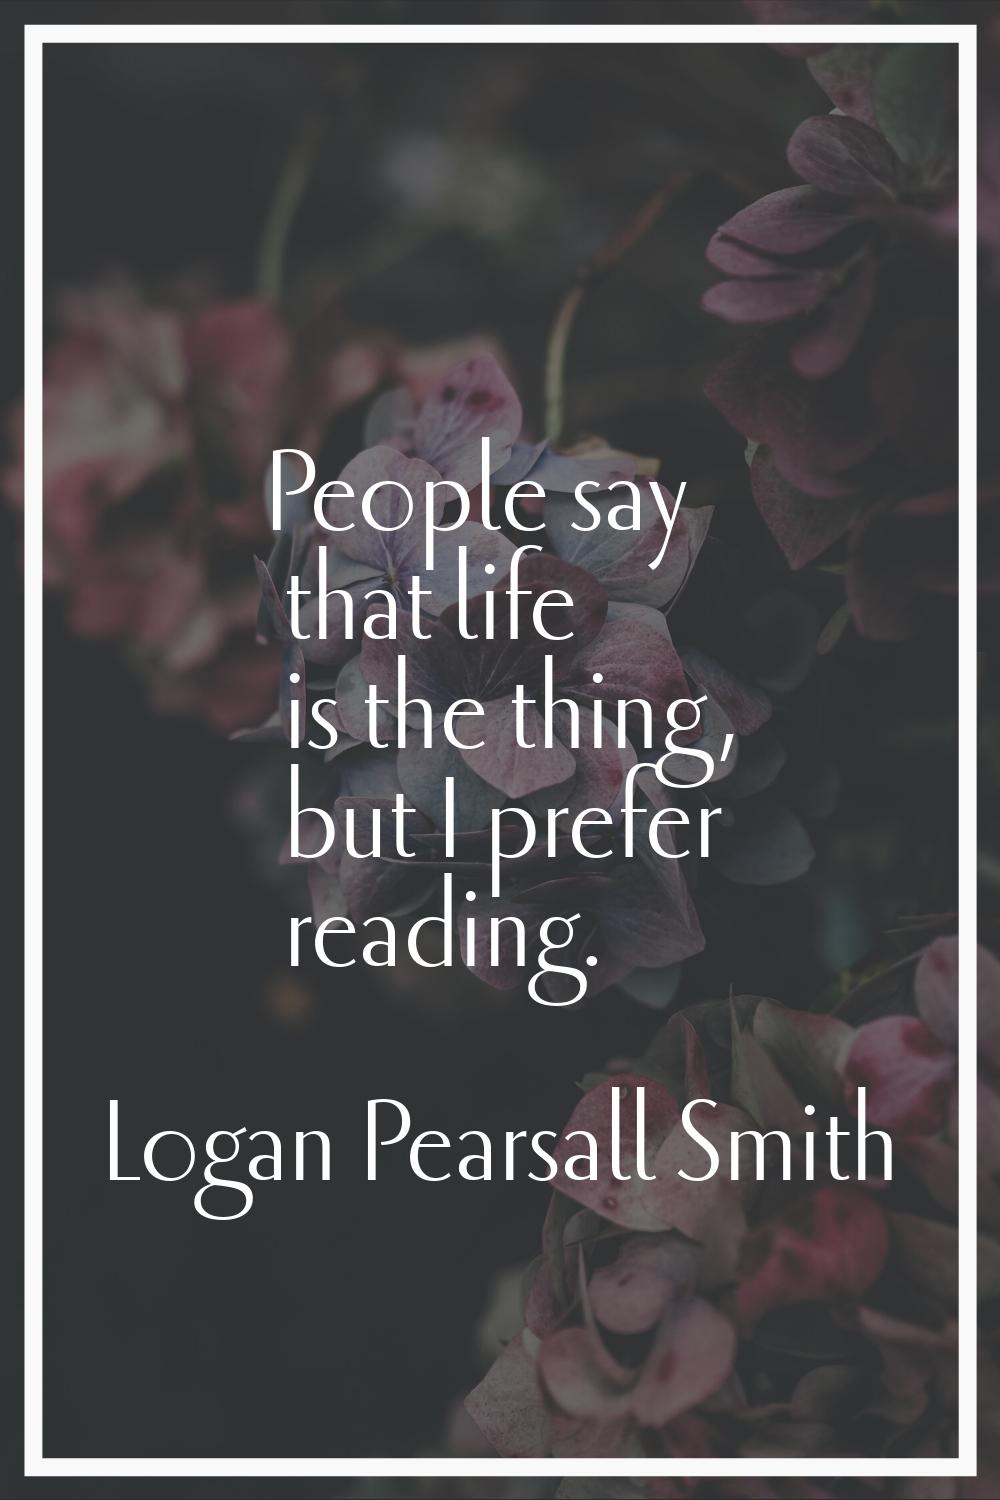 People say that life is the thing, but I prefer reading.